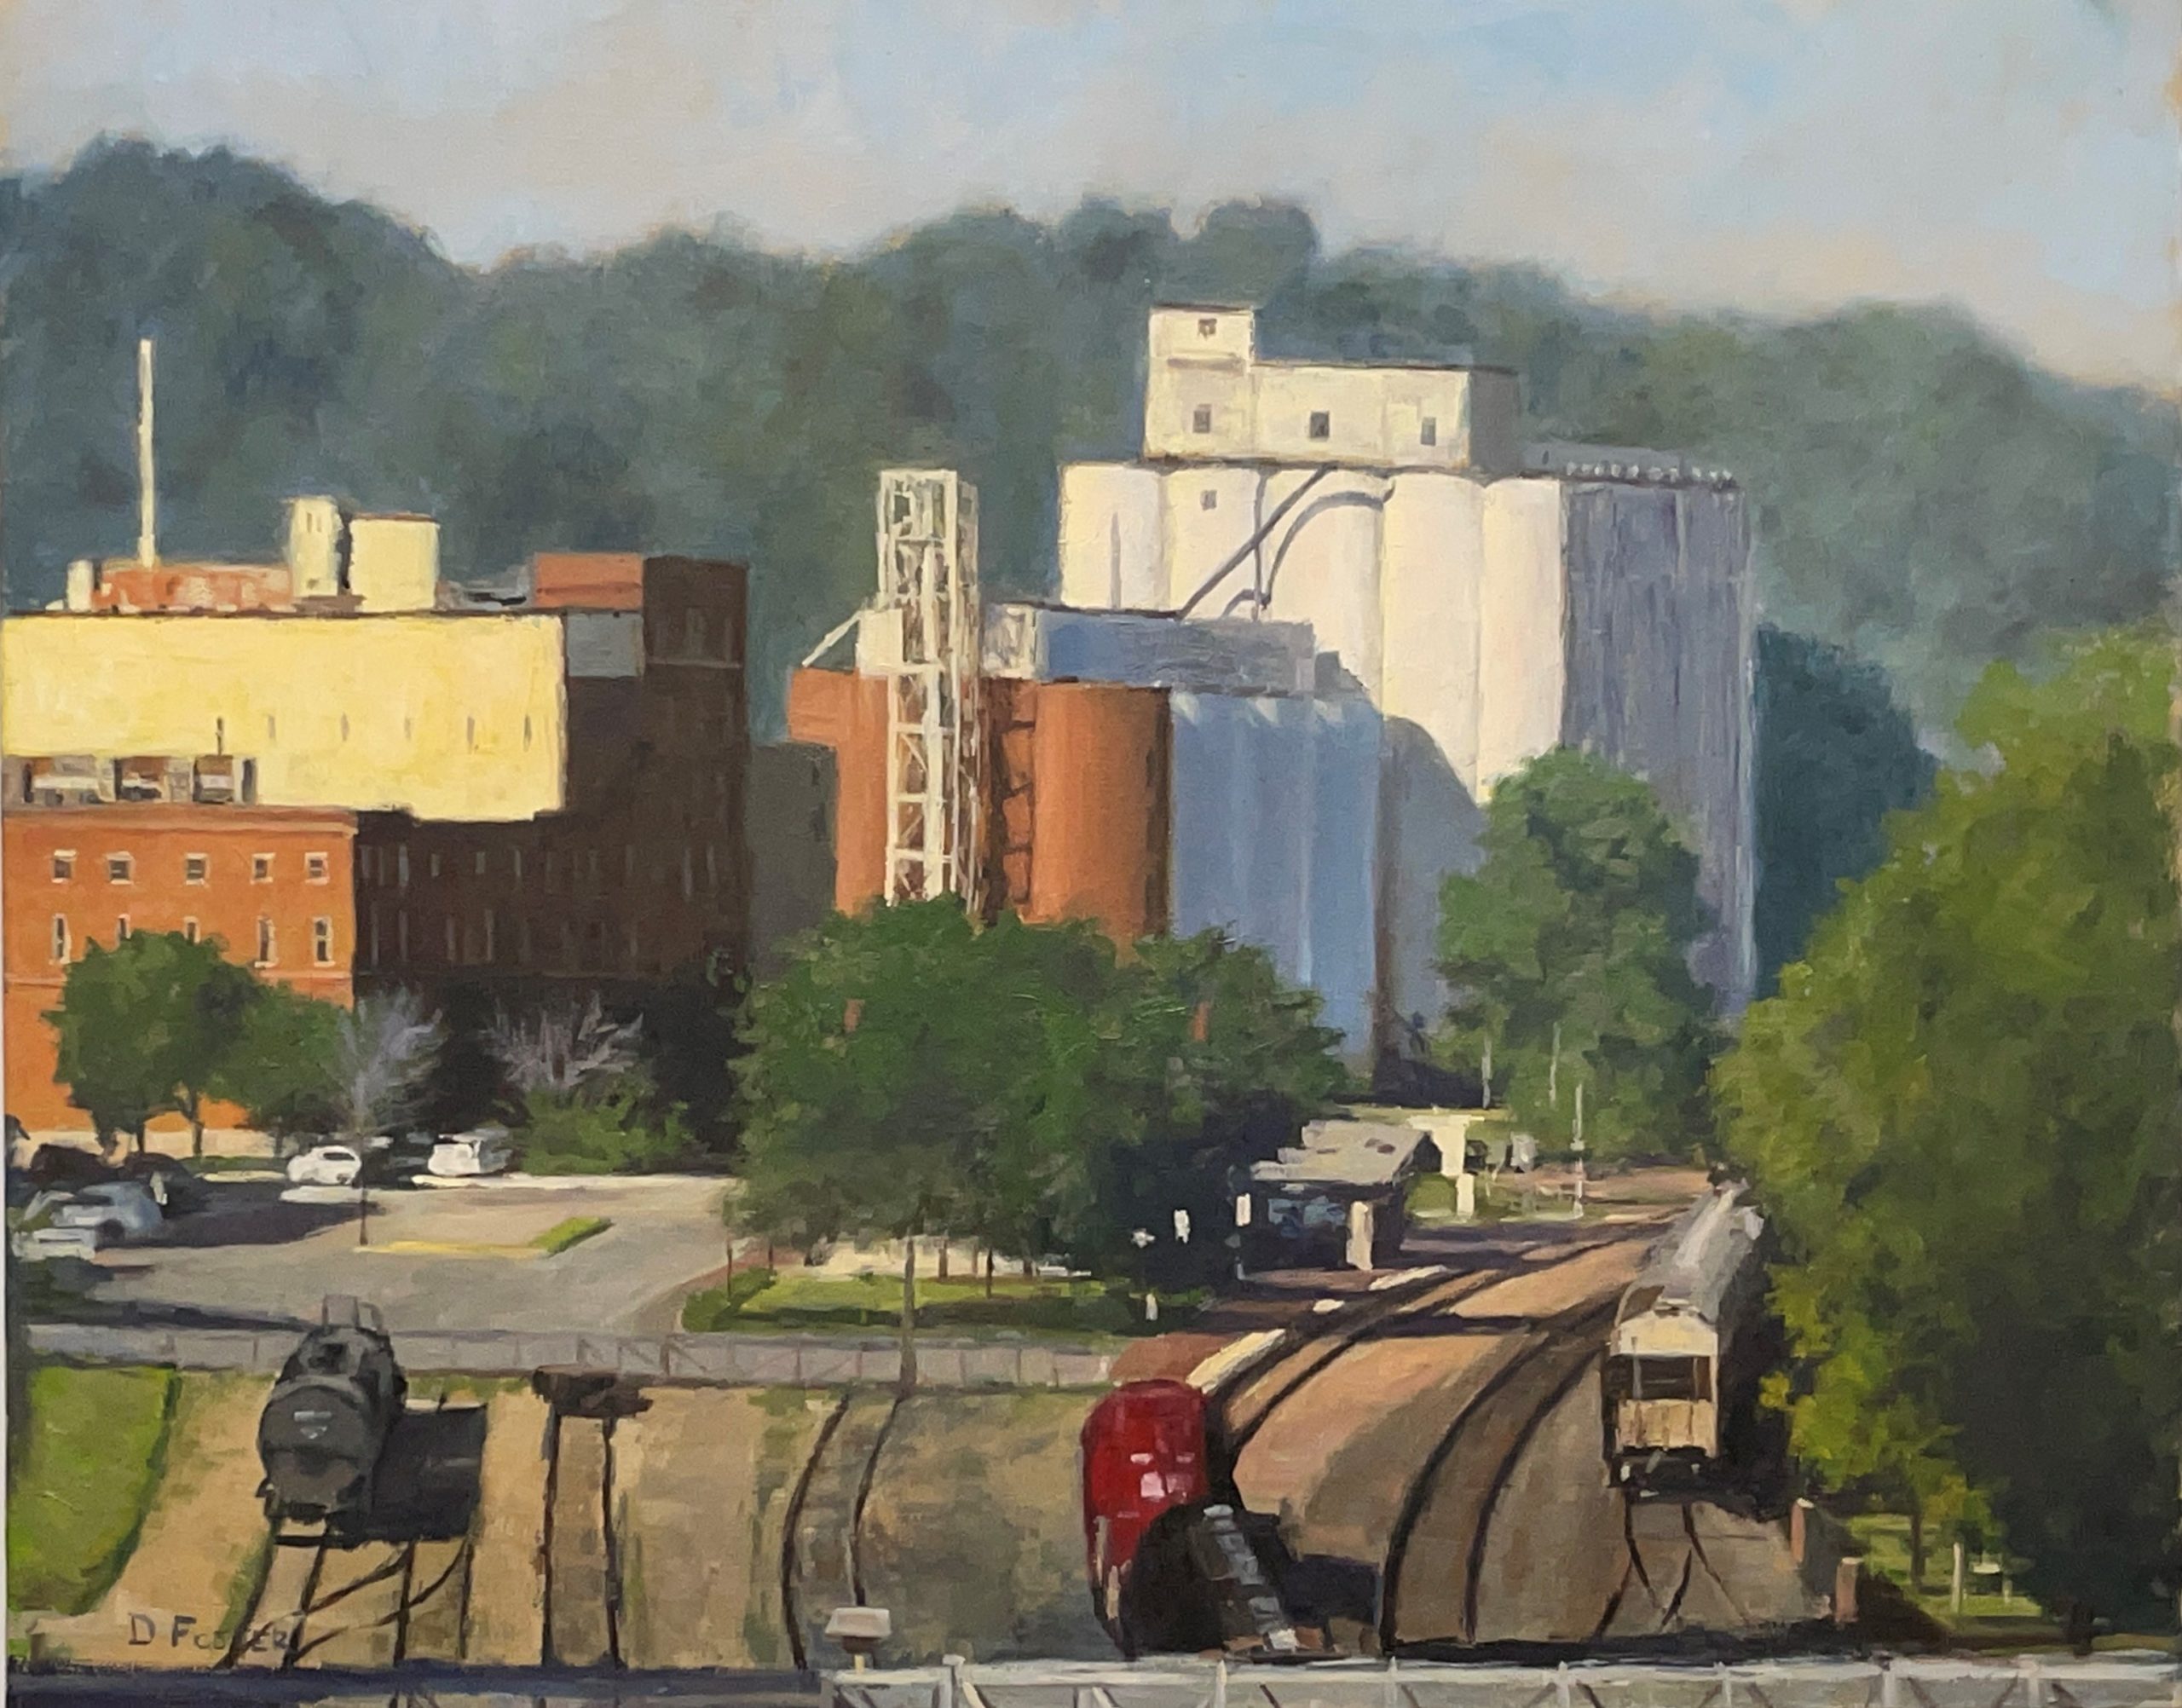 Best Sense of Red Wing, Sponsored by Red Wing Shoes: "Morning for Industry" by Diane Foster, oil, 16 x 20 in.